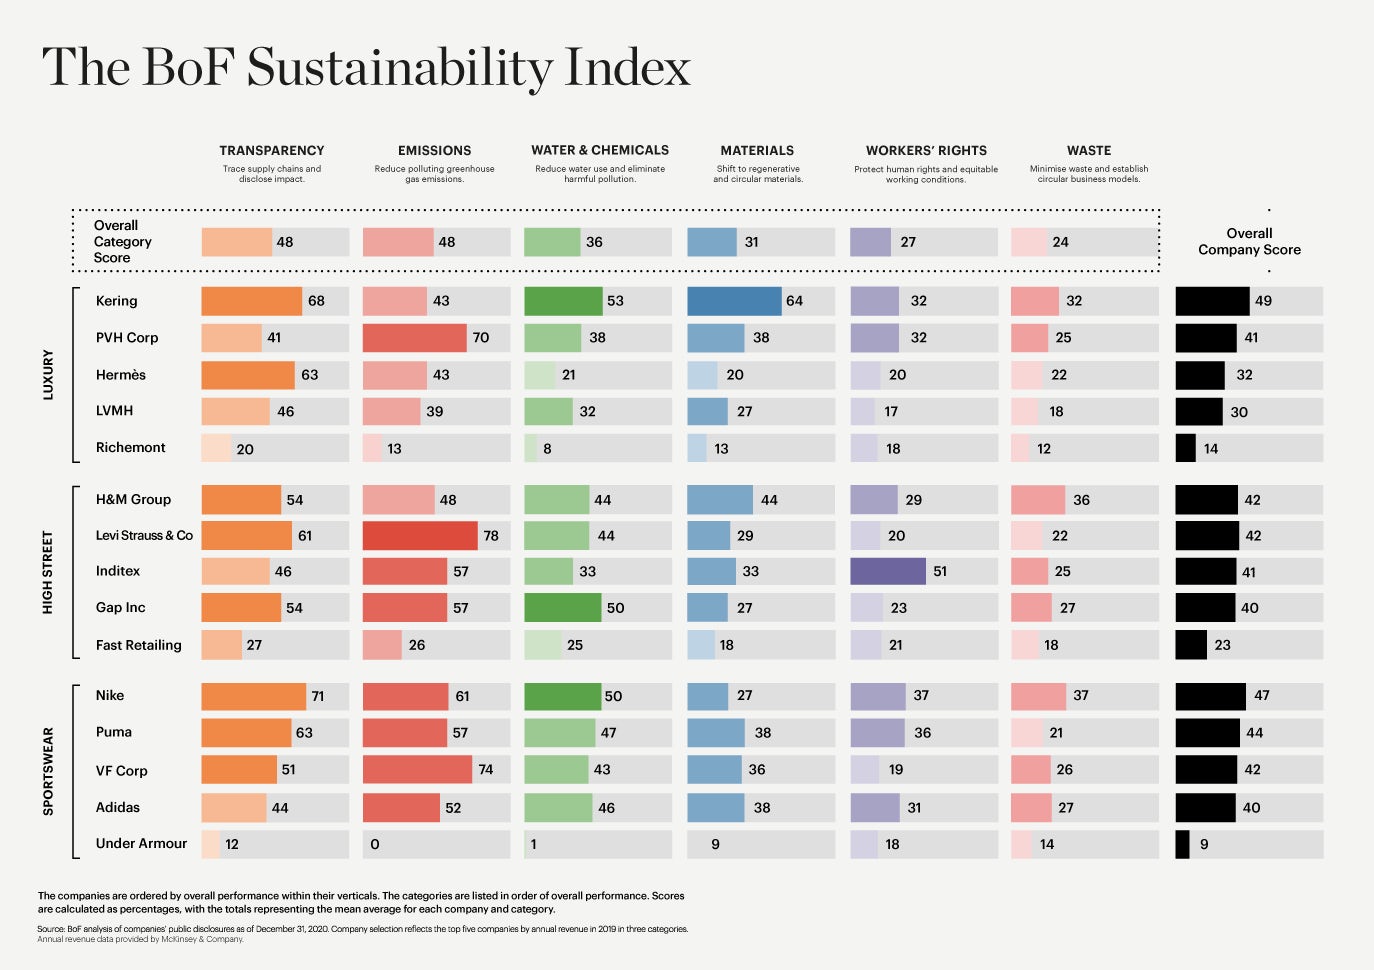 BoF Sustainability Report results from the index